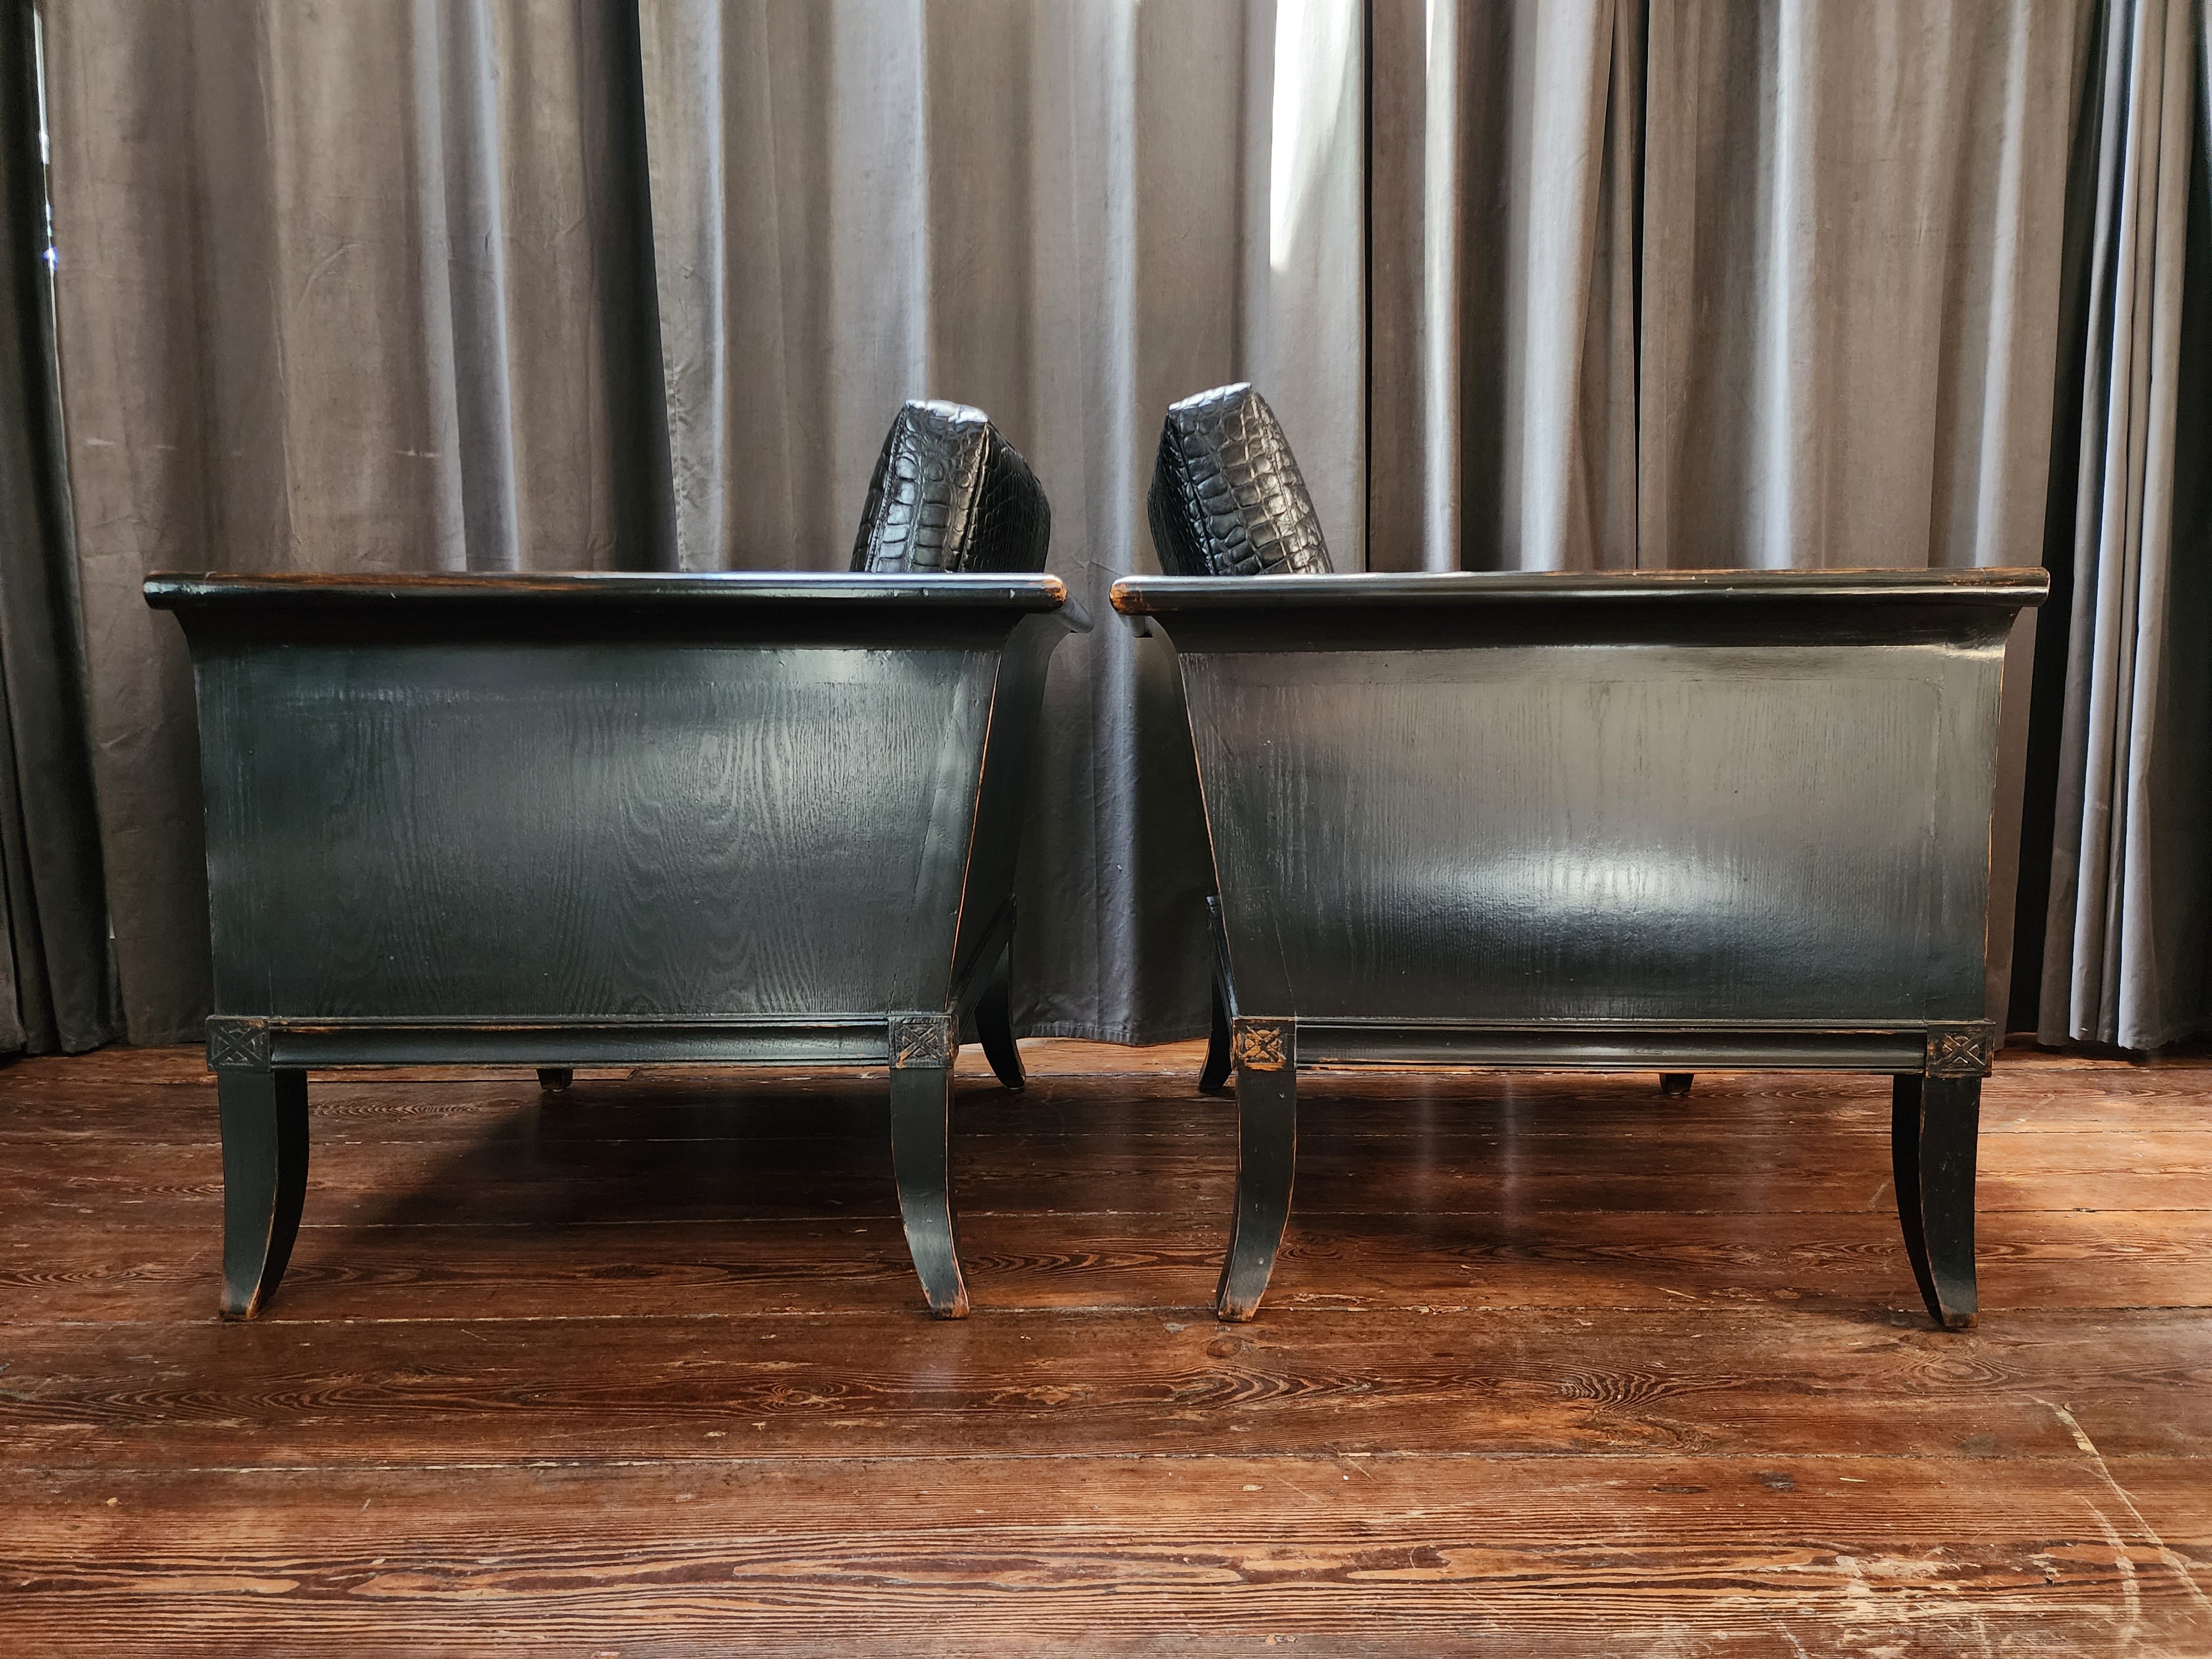 A spectacular and chic pair of Ming Style armchairs with embossed leather seats. Made from extremely hardwood with a gorgeous weathered petina through the ebony glaze.
The alligator in boss leather is beautiful and new.
These chairs present a lot